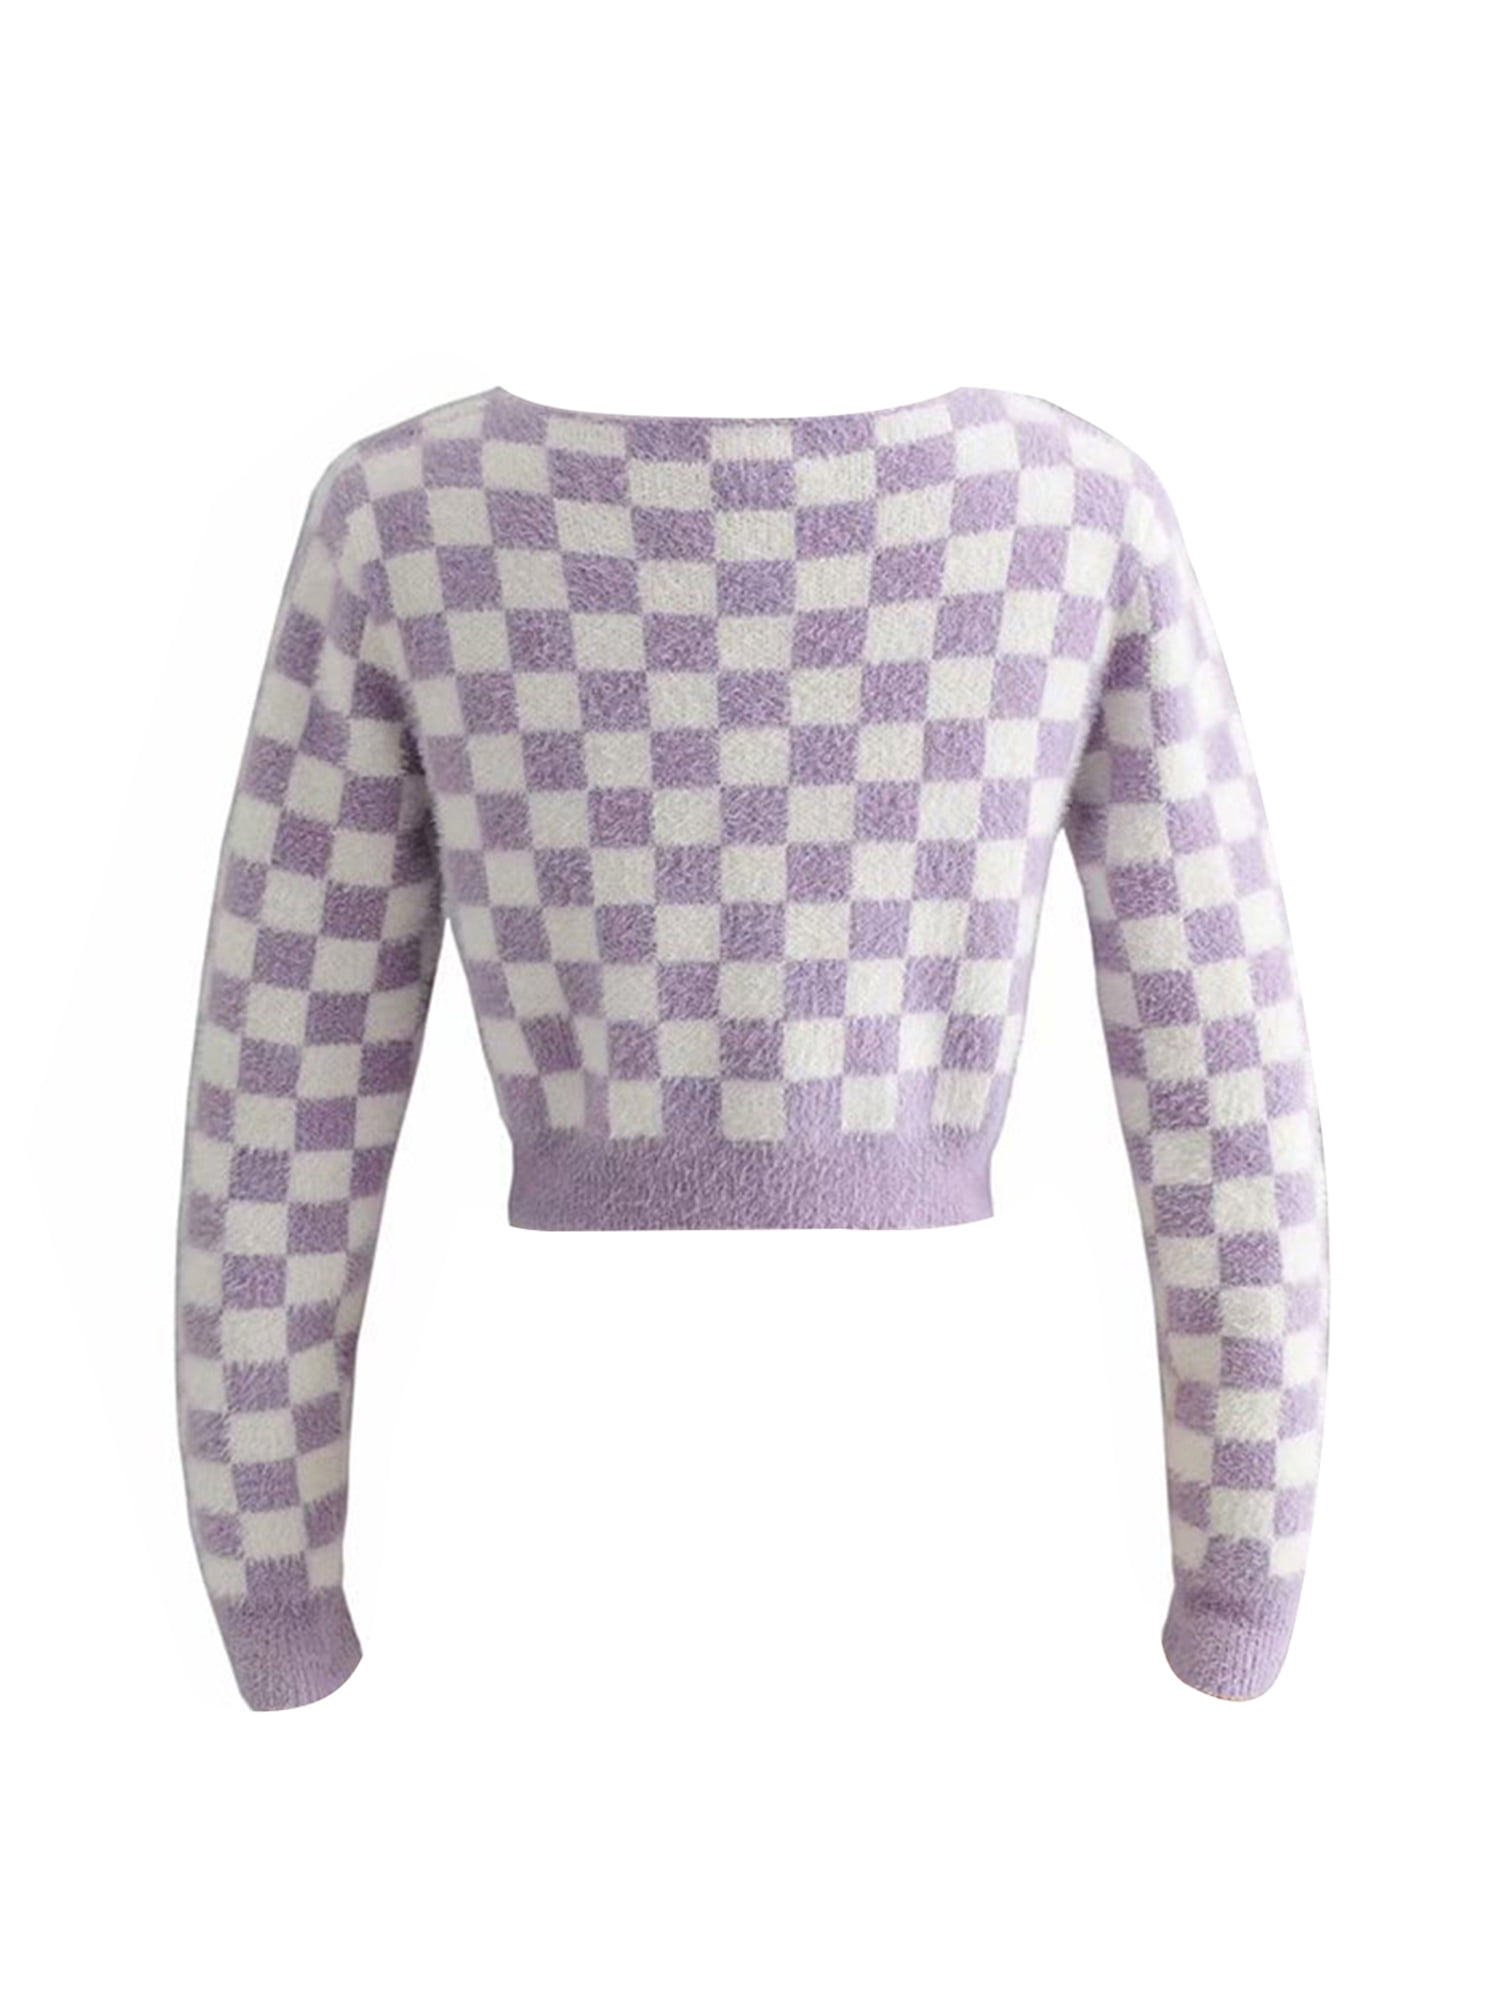 Louis Vuitton Purple And Beige Checkerboard Ugly Christmas Sweater